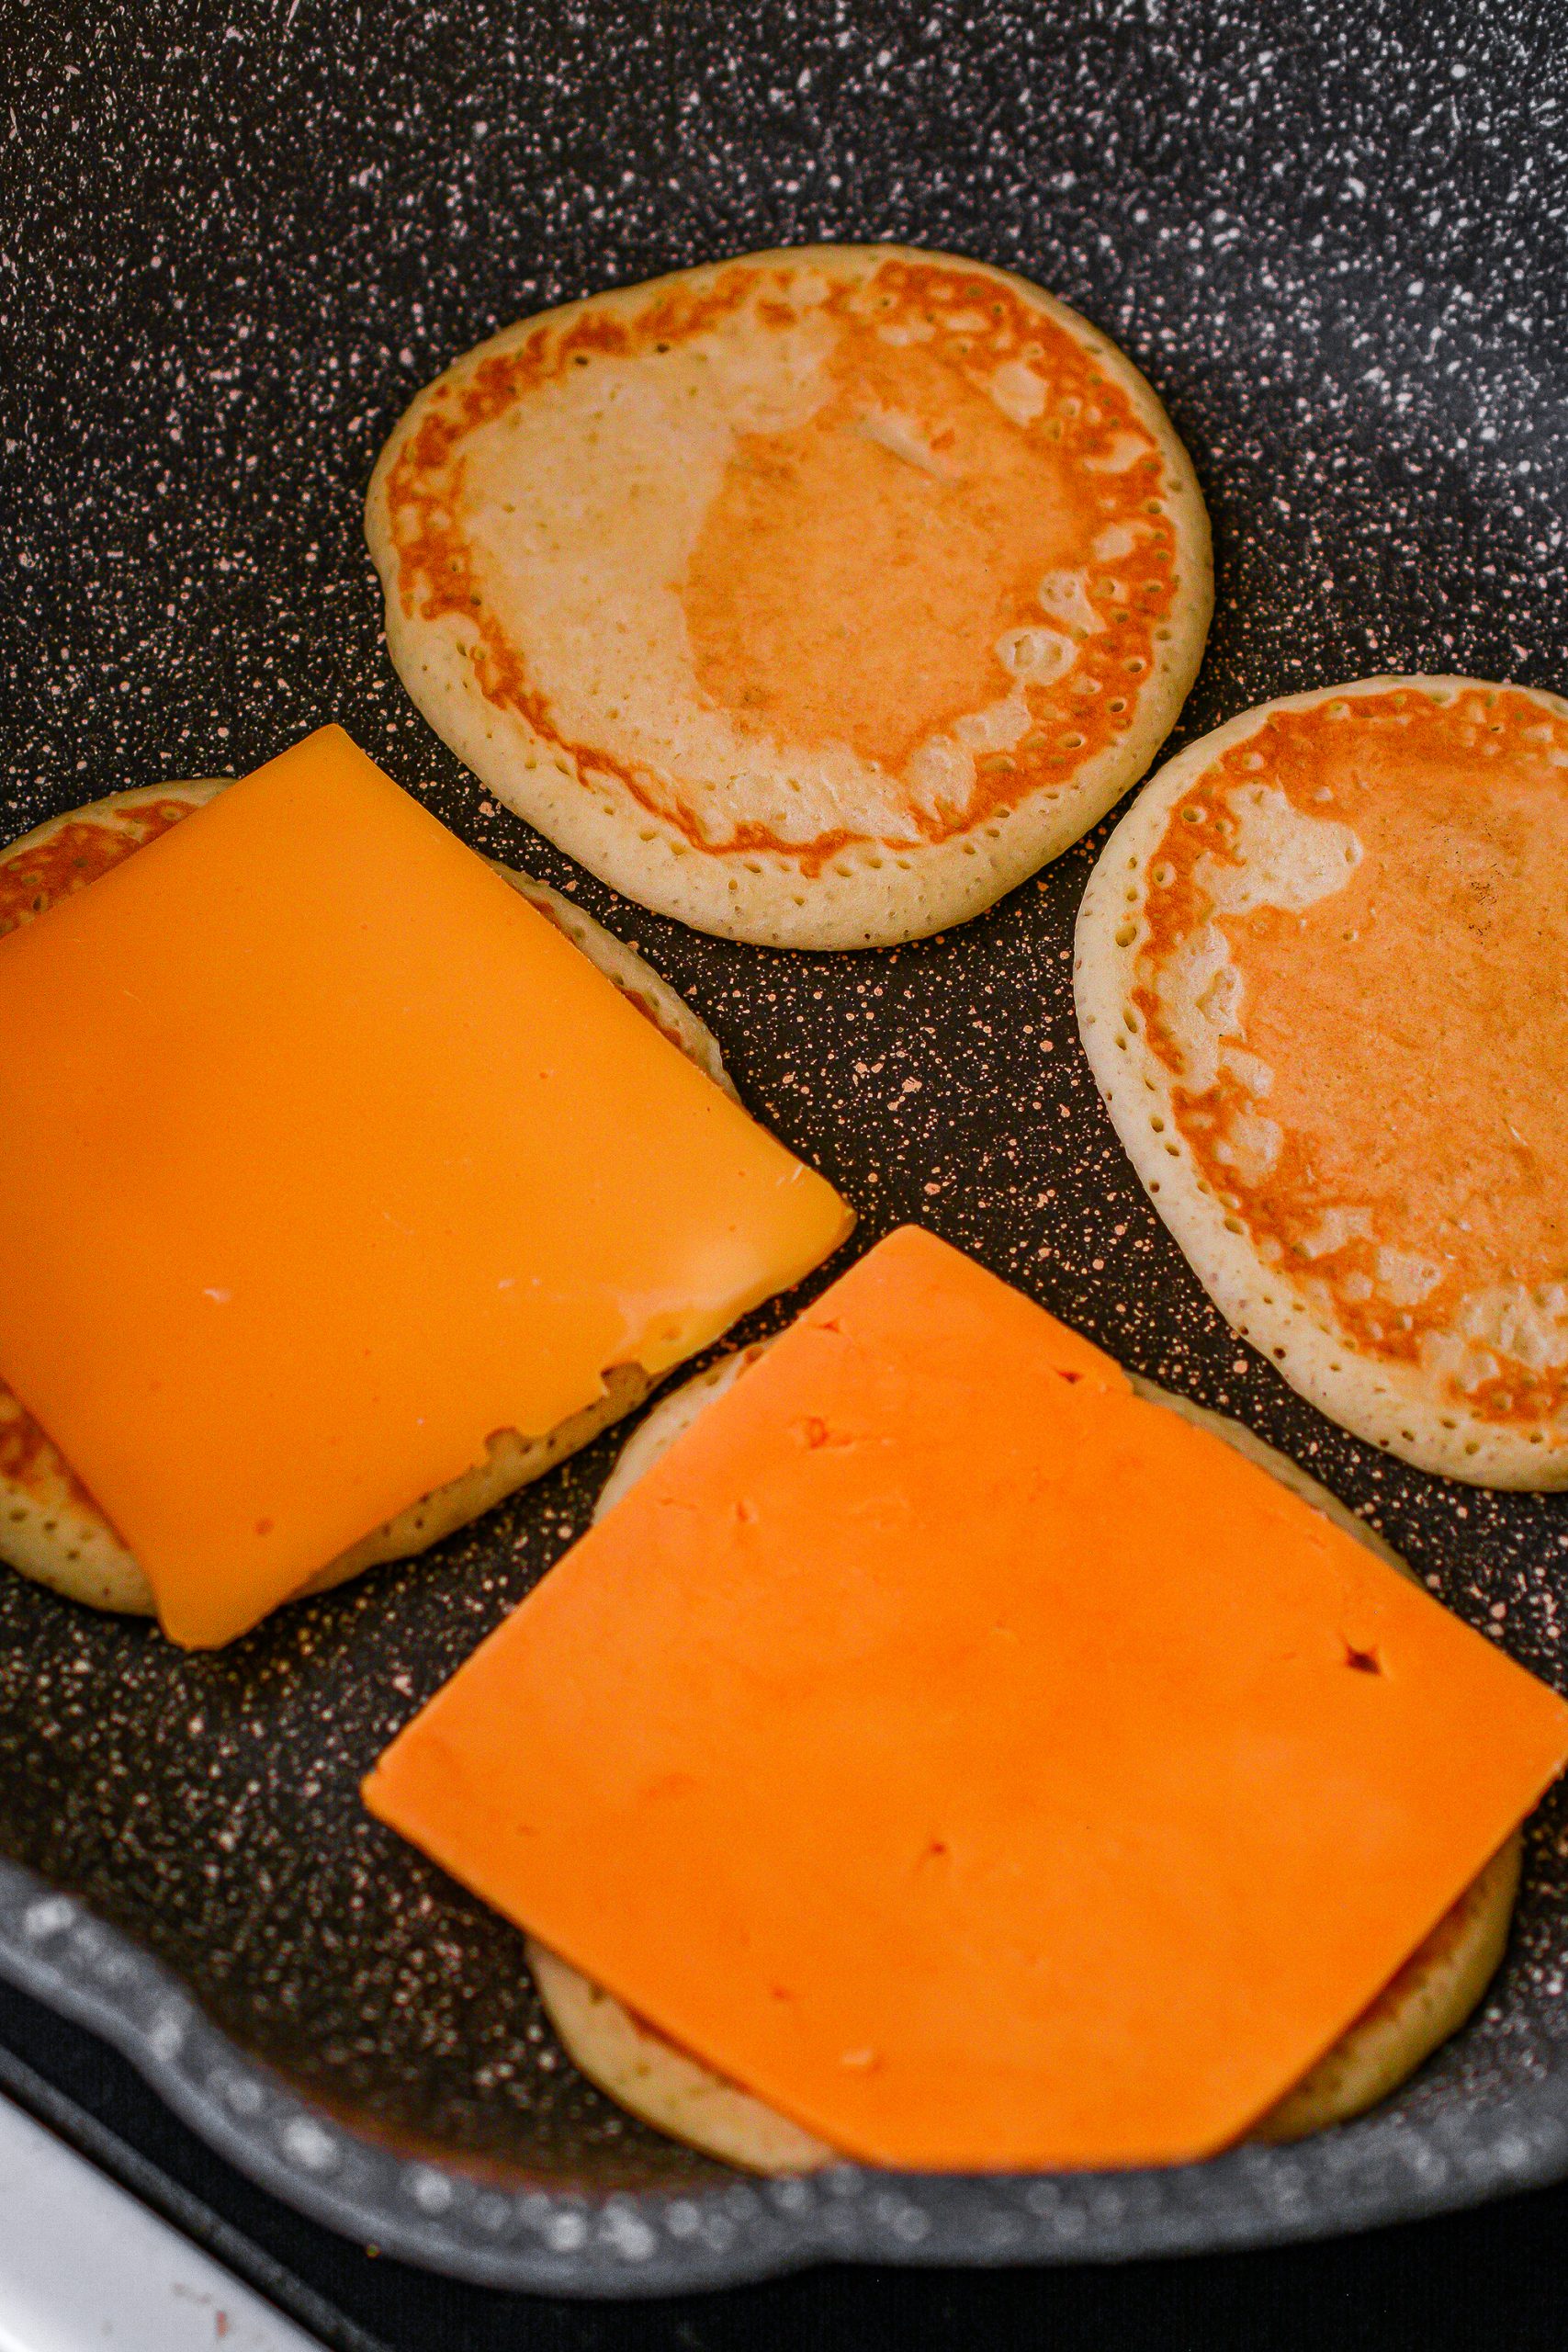 Top four of the pancakes with a slice of American cheese.